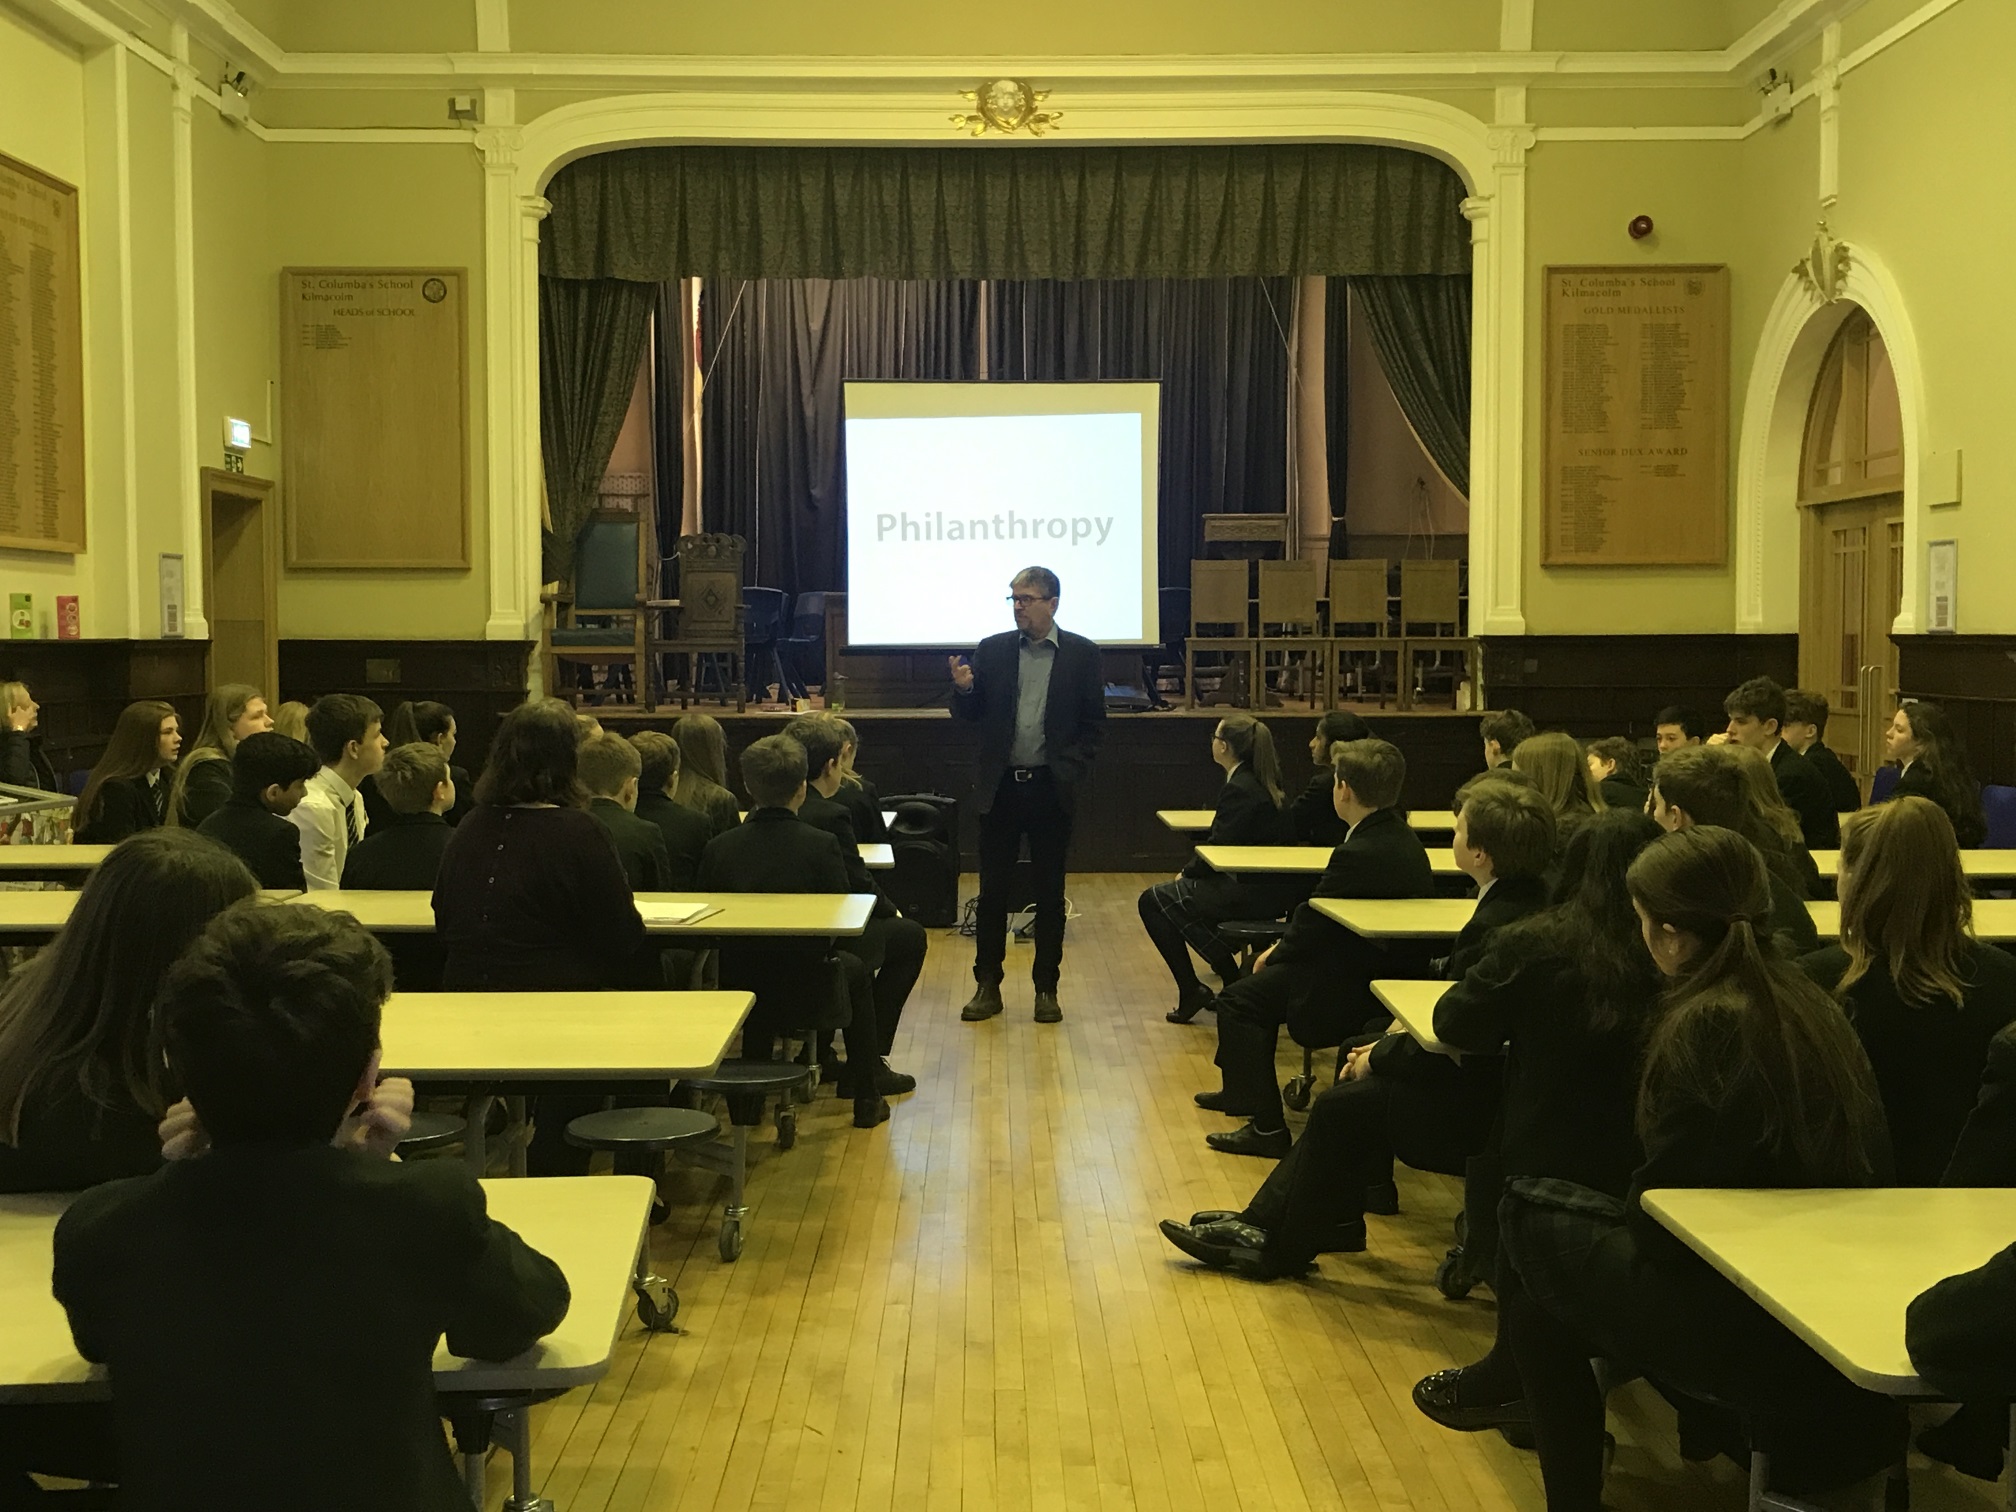 St Columba's School pupils receive introduction to the Youth and Philanthropy Initiative